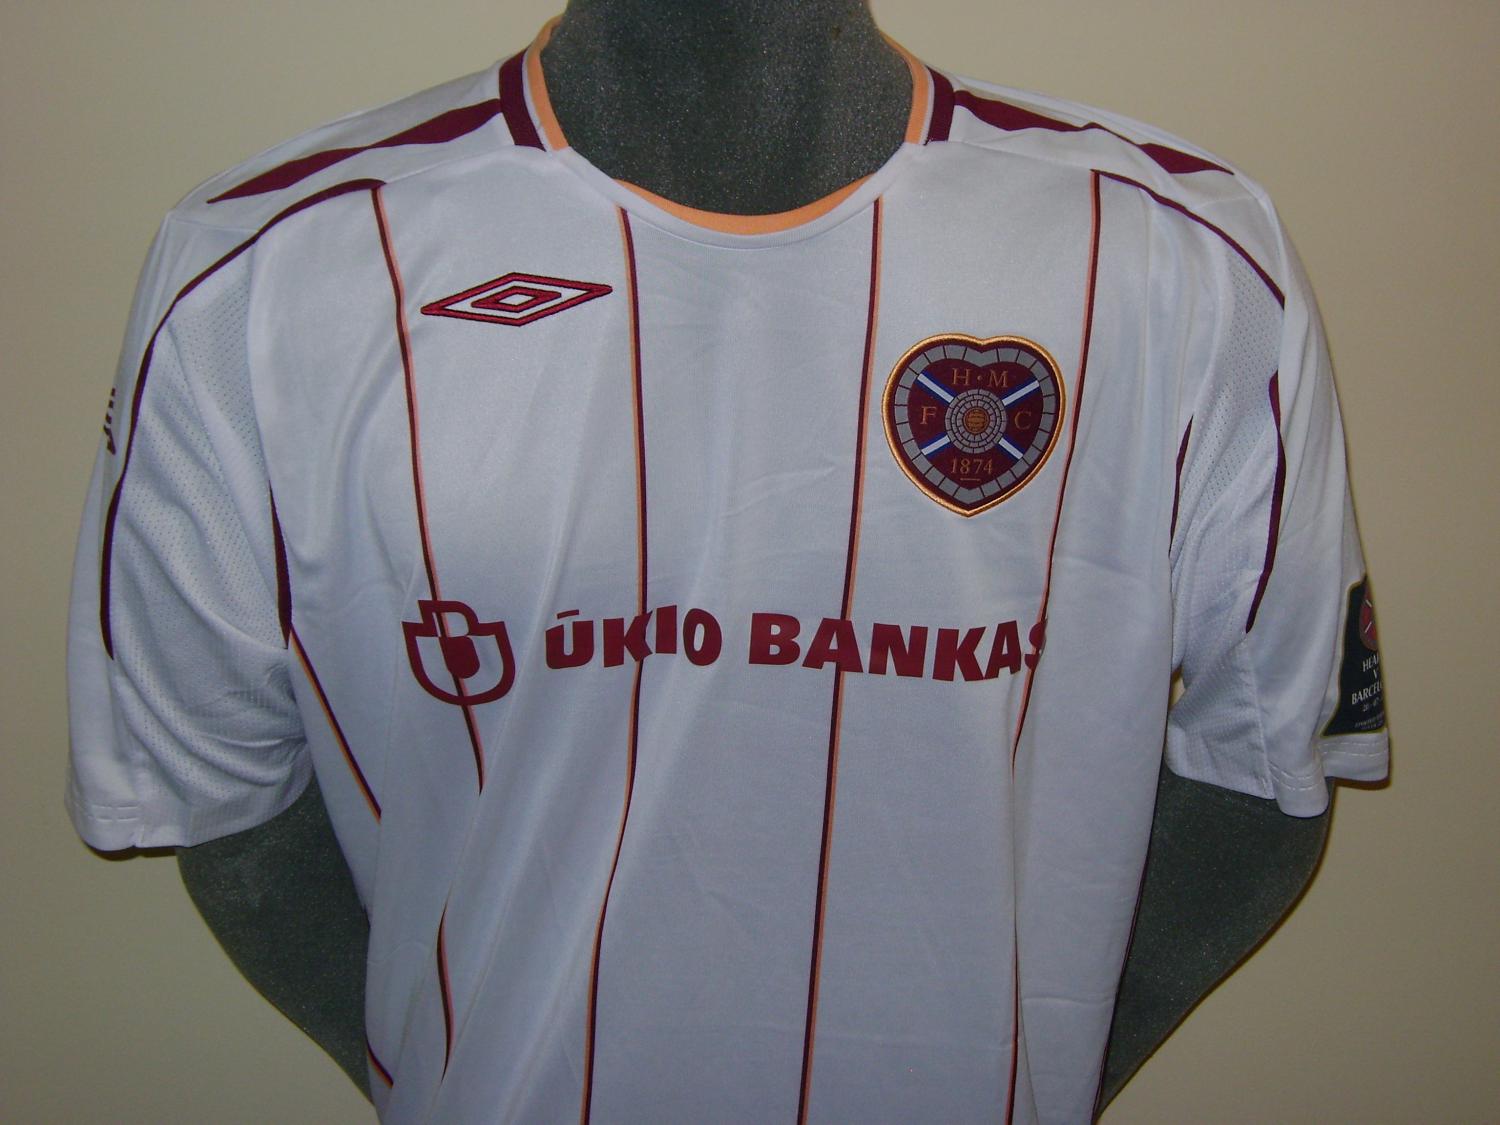 maillot hearts particulier 2007-2008 pas cher